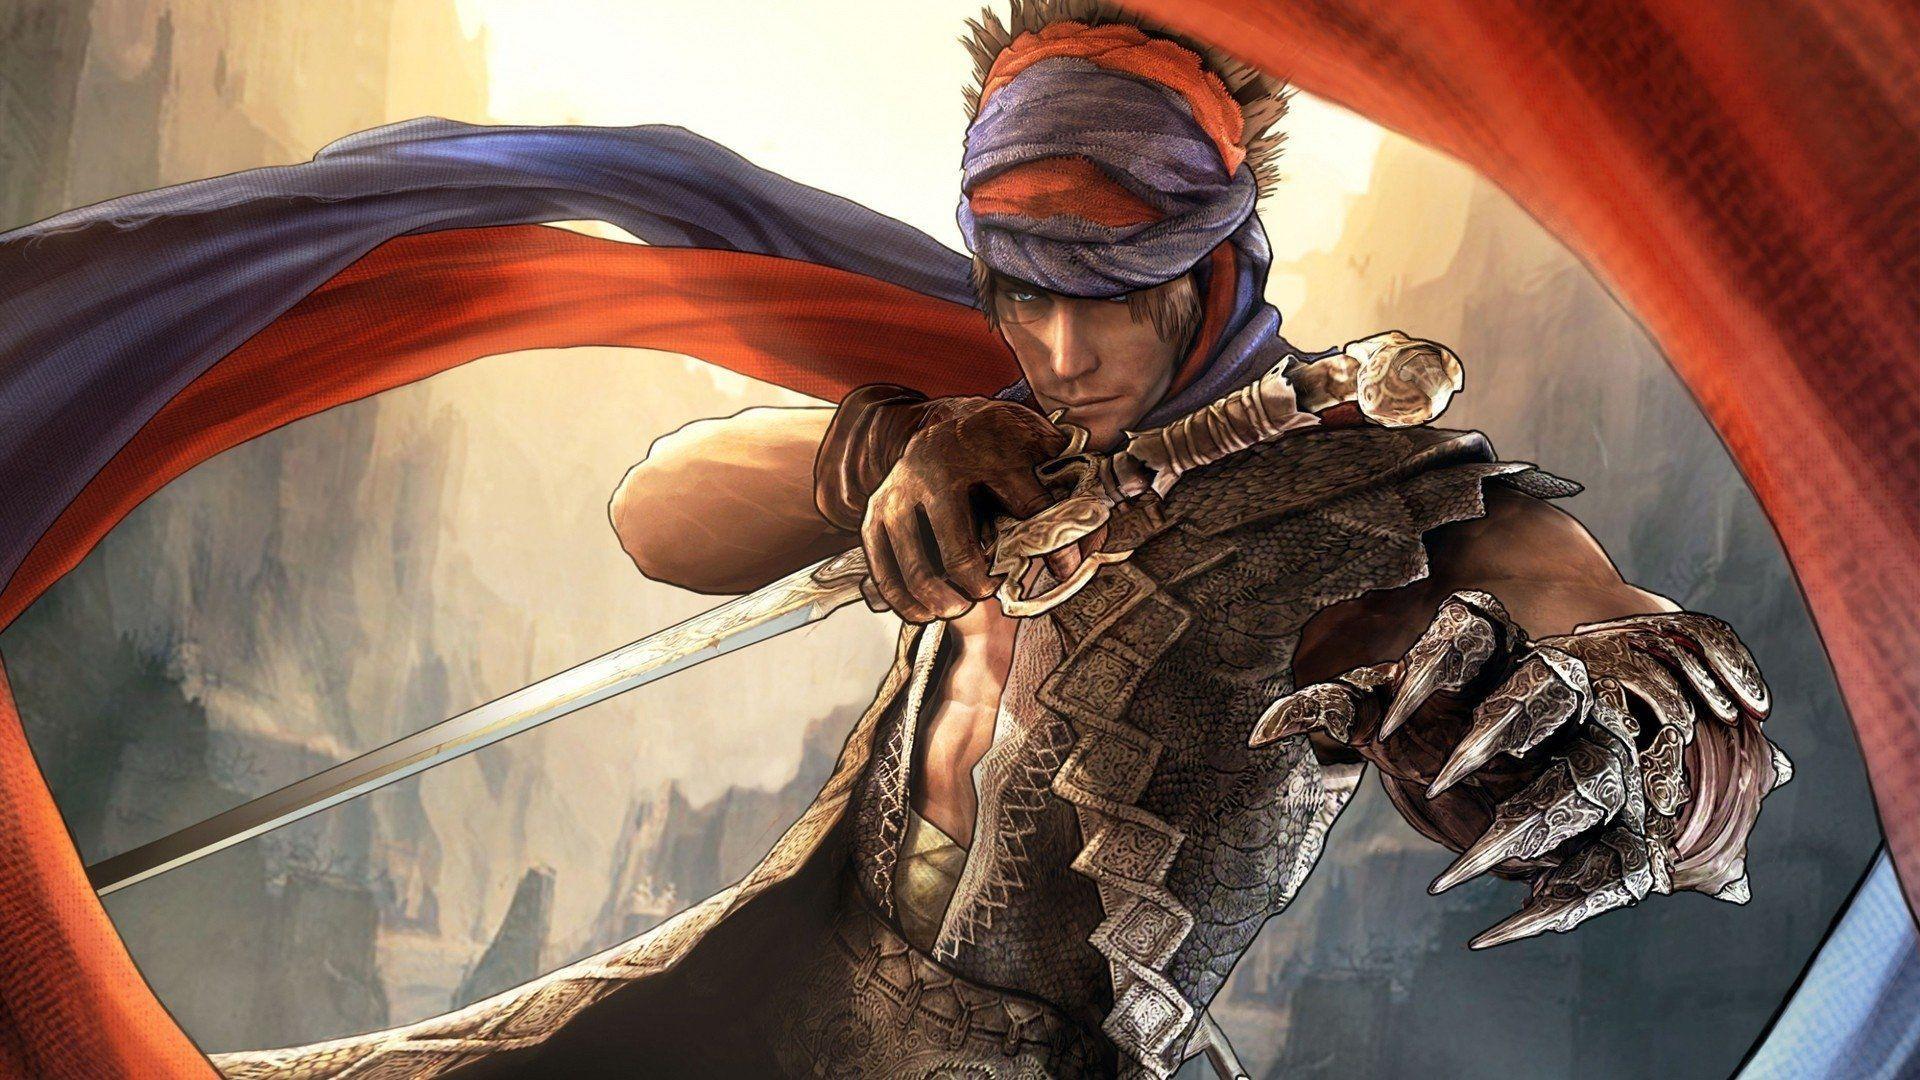 Prince Of Persia: The Forgotten Sands HD Wallpaper